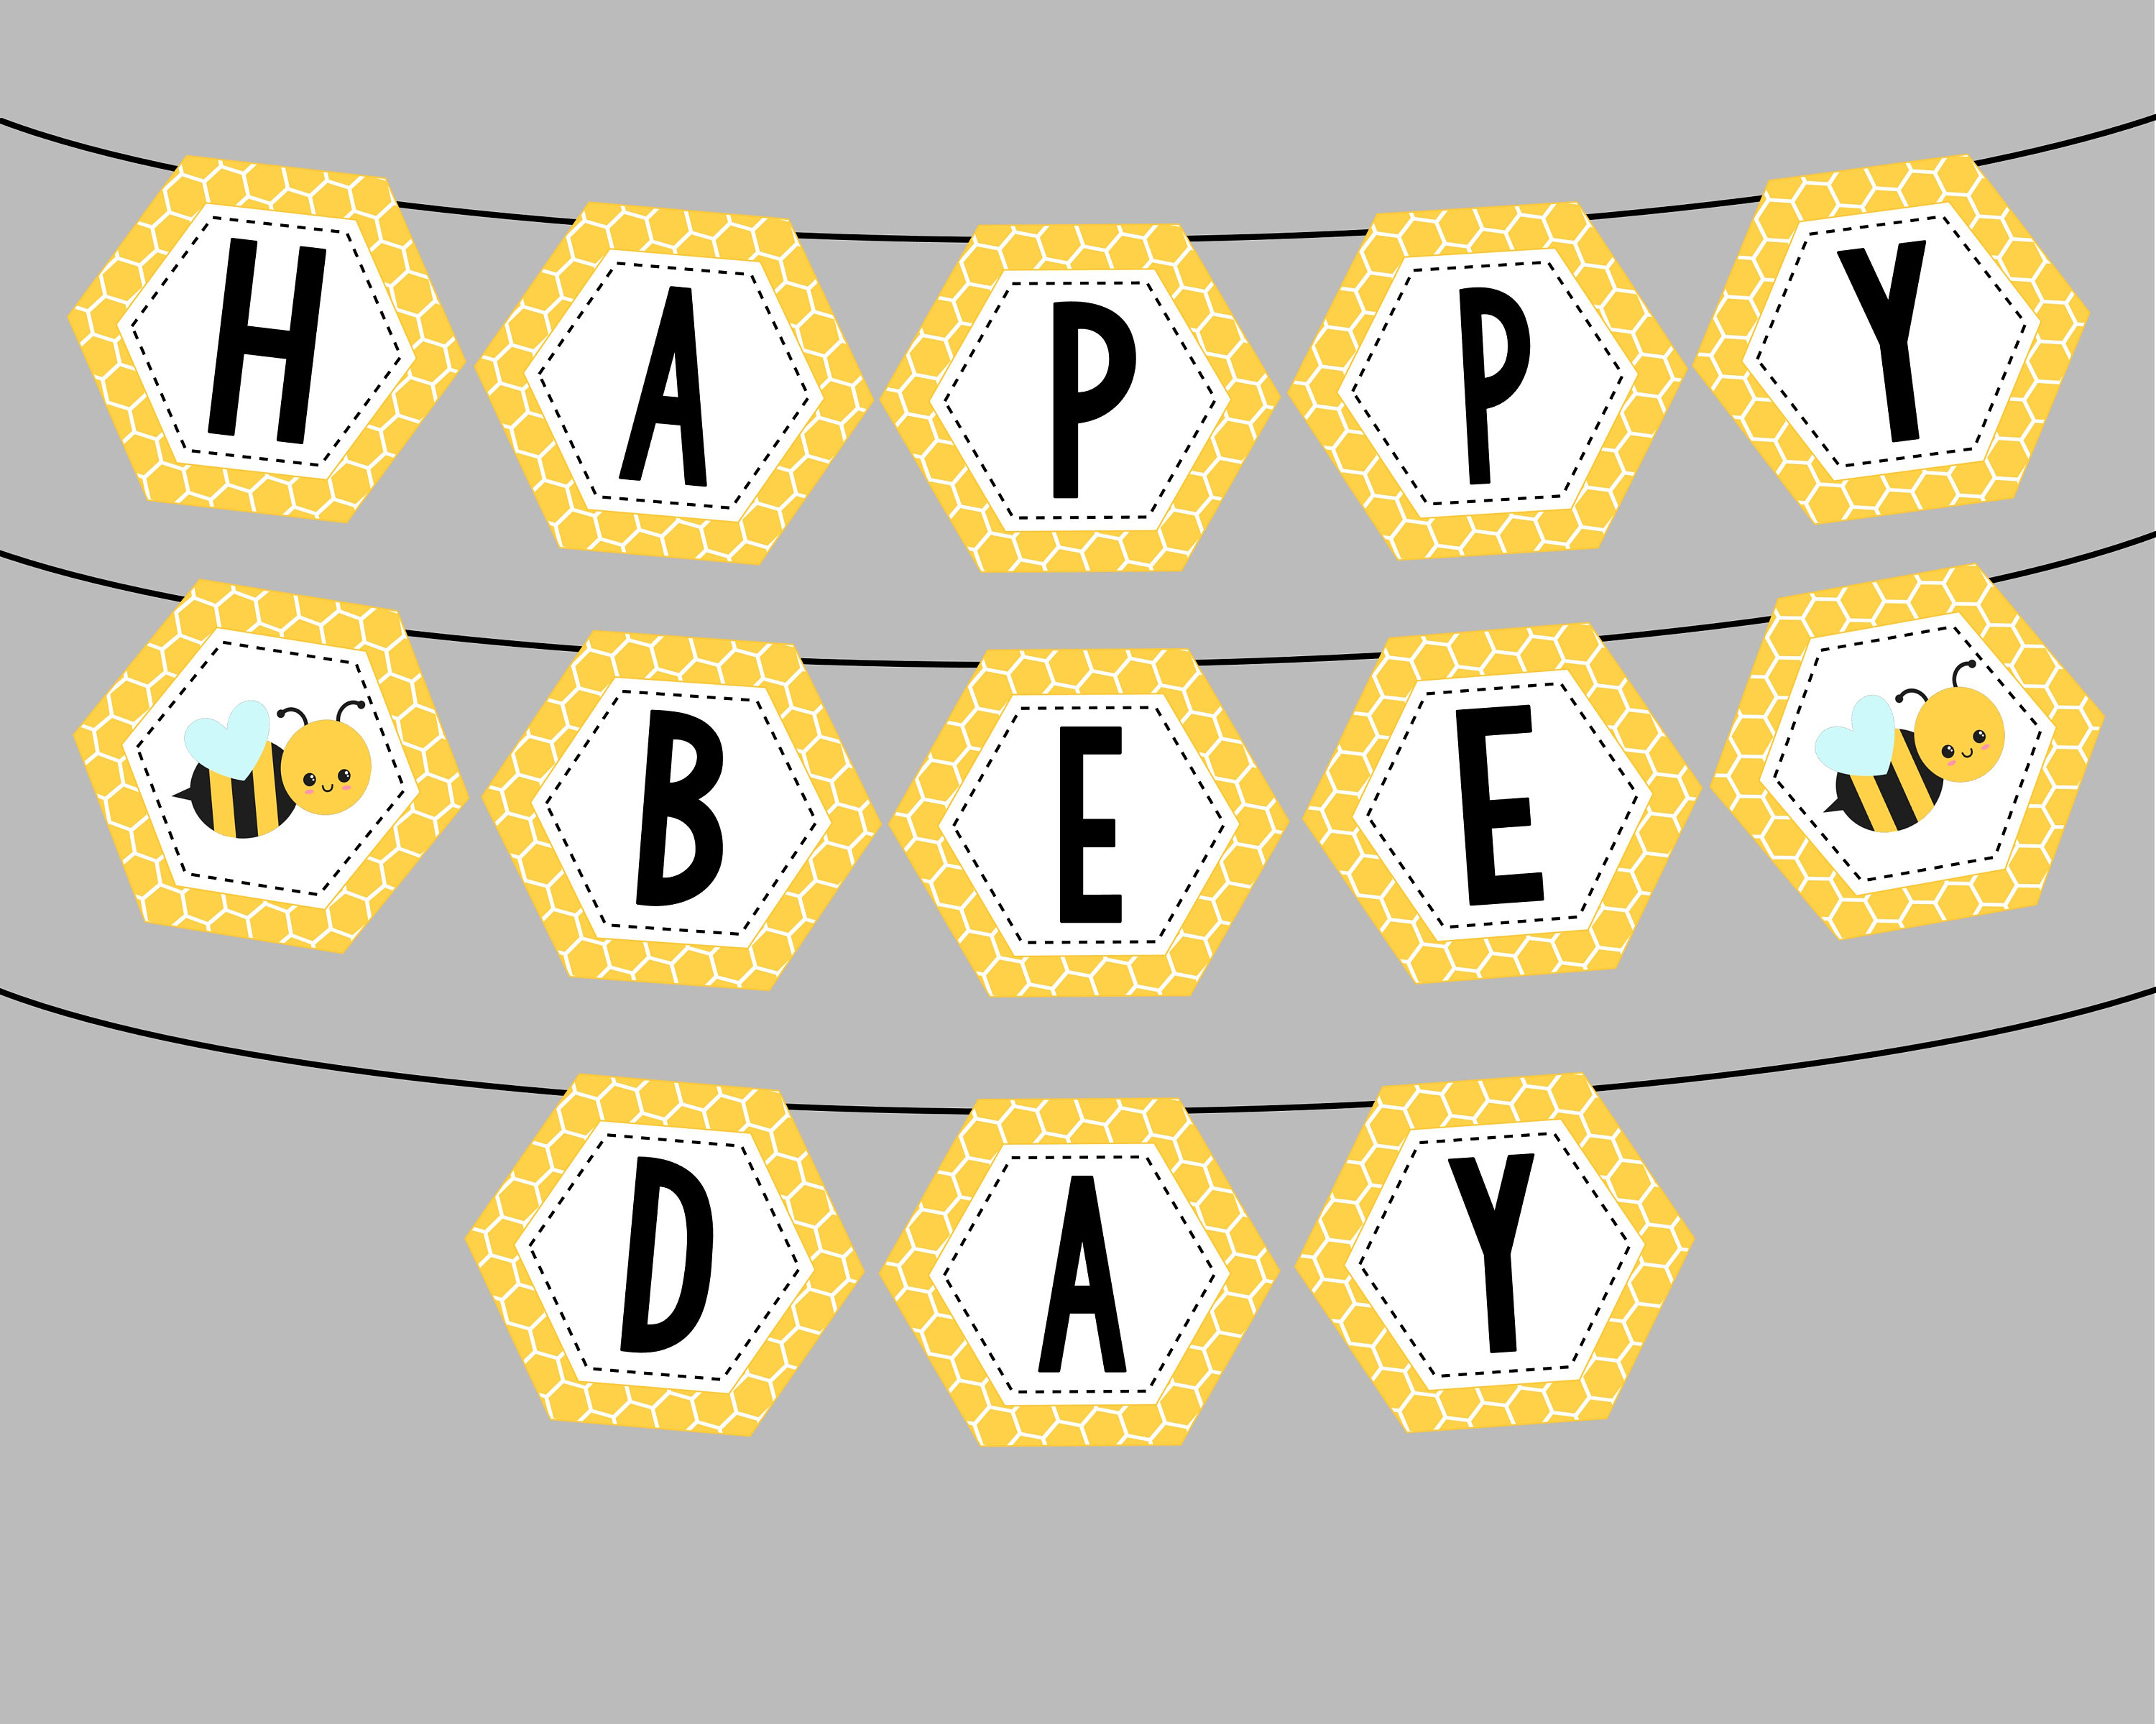 Packingmaster 88pcs Bee Party Supplies with Happy Bee Day Banners